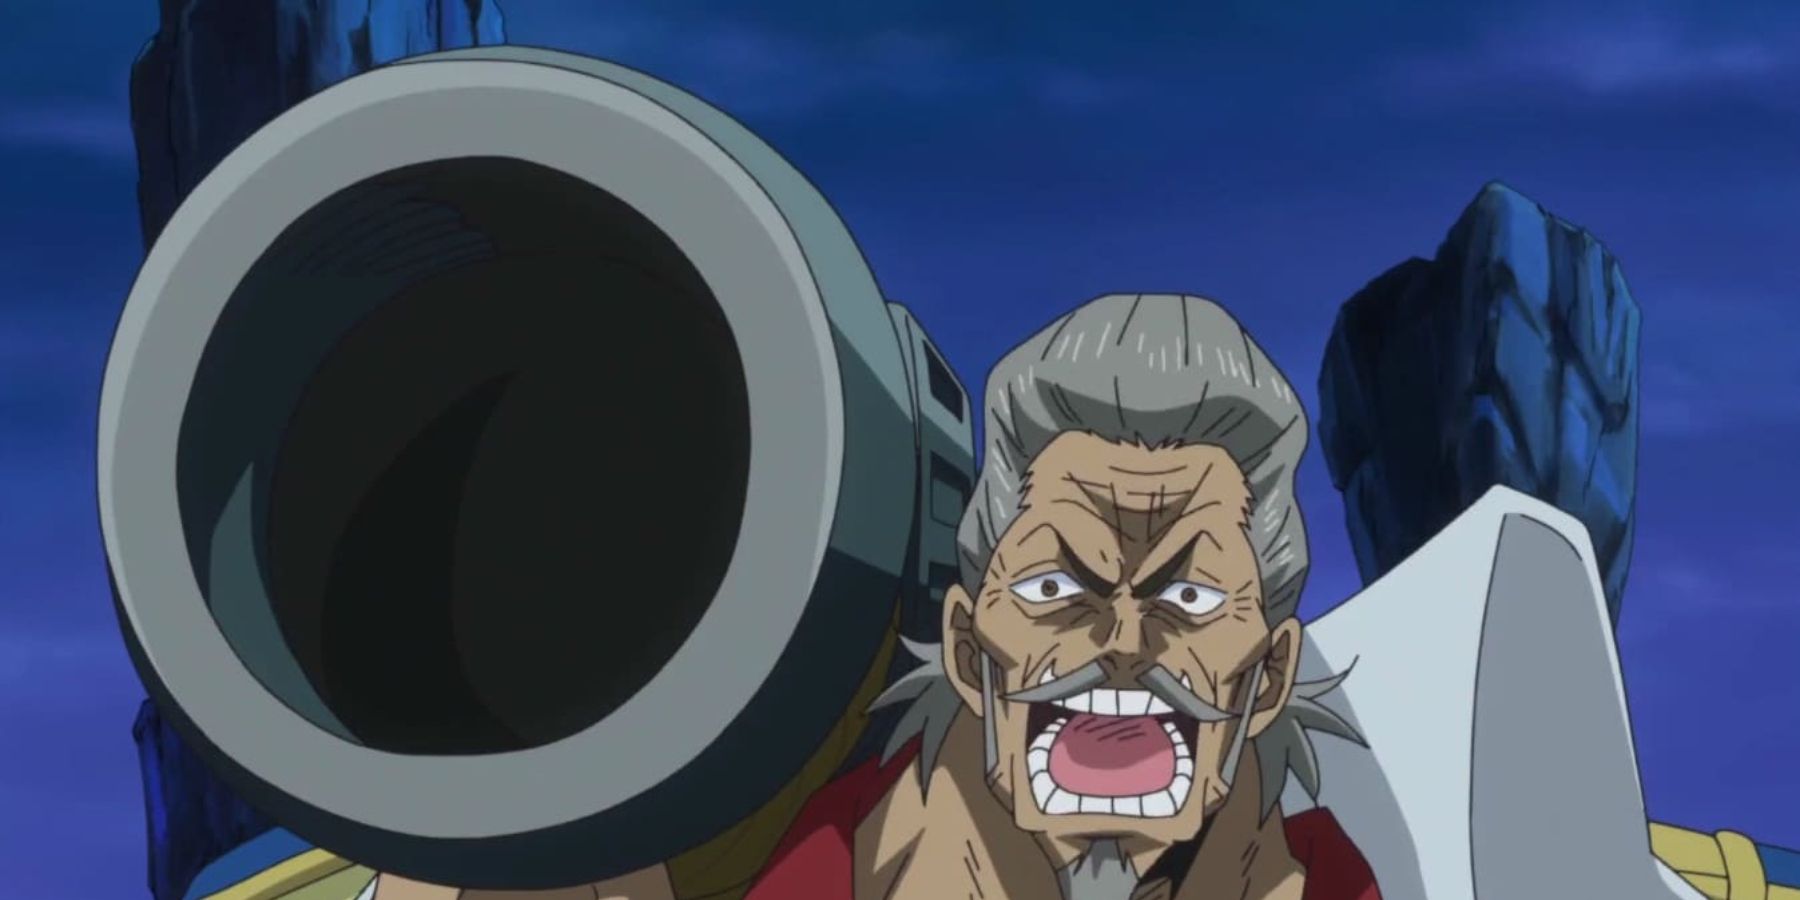 The Devil’s Fist – A Show Down! Luffy Vs. Grount! One Piece